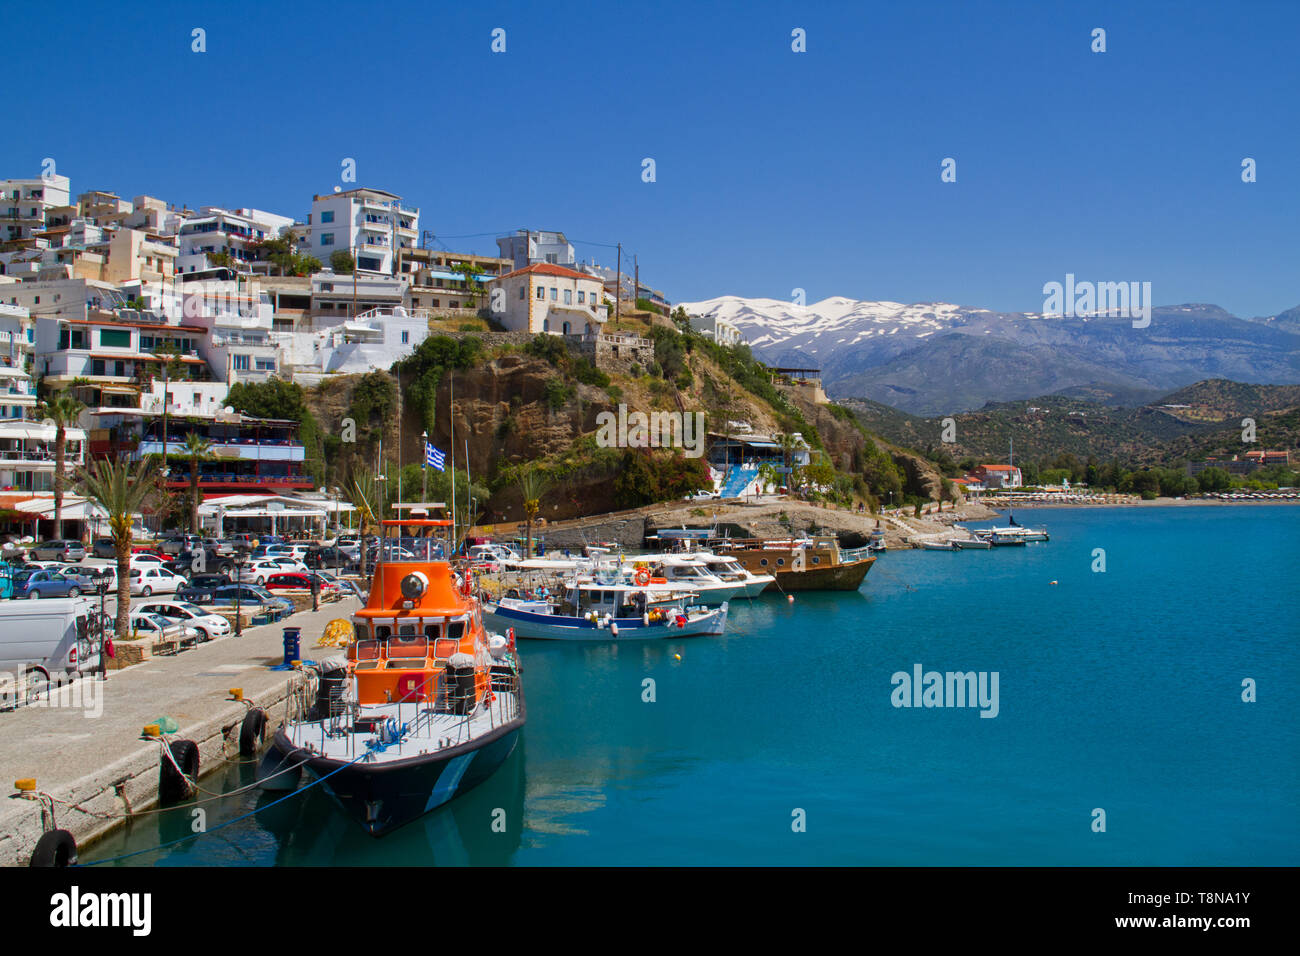 View on the charming fisherman’s village Agia Galini on the South coast of Crete, in the background the snow-covered Idi Mountains Stock Photo